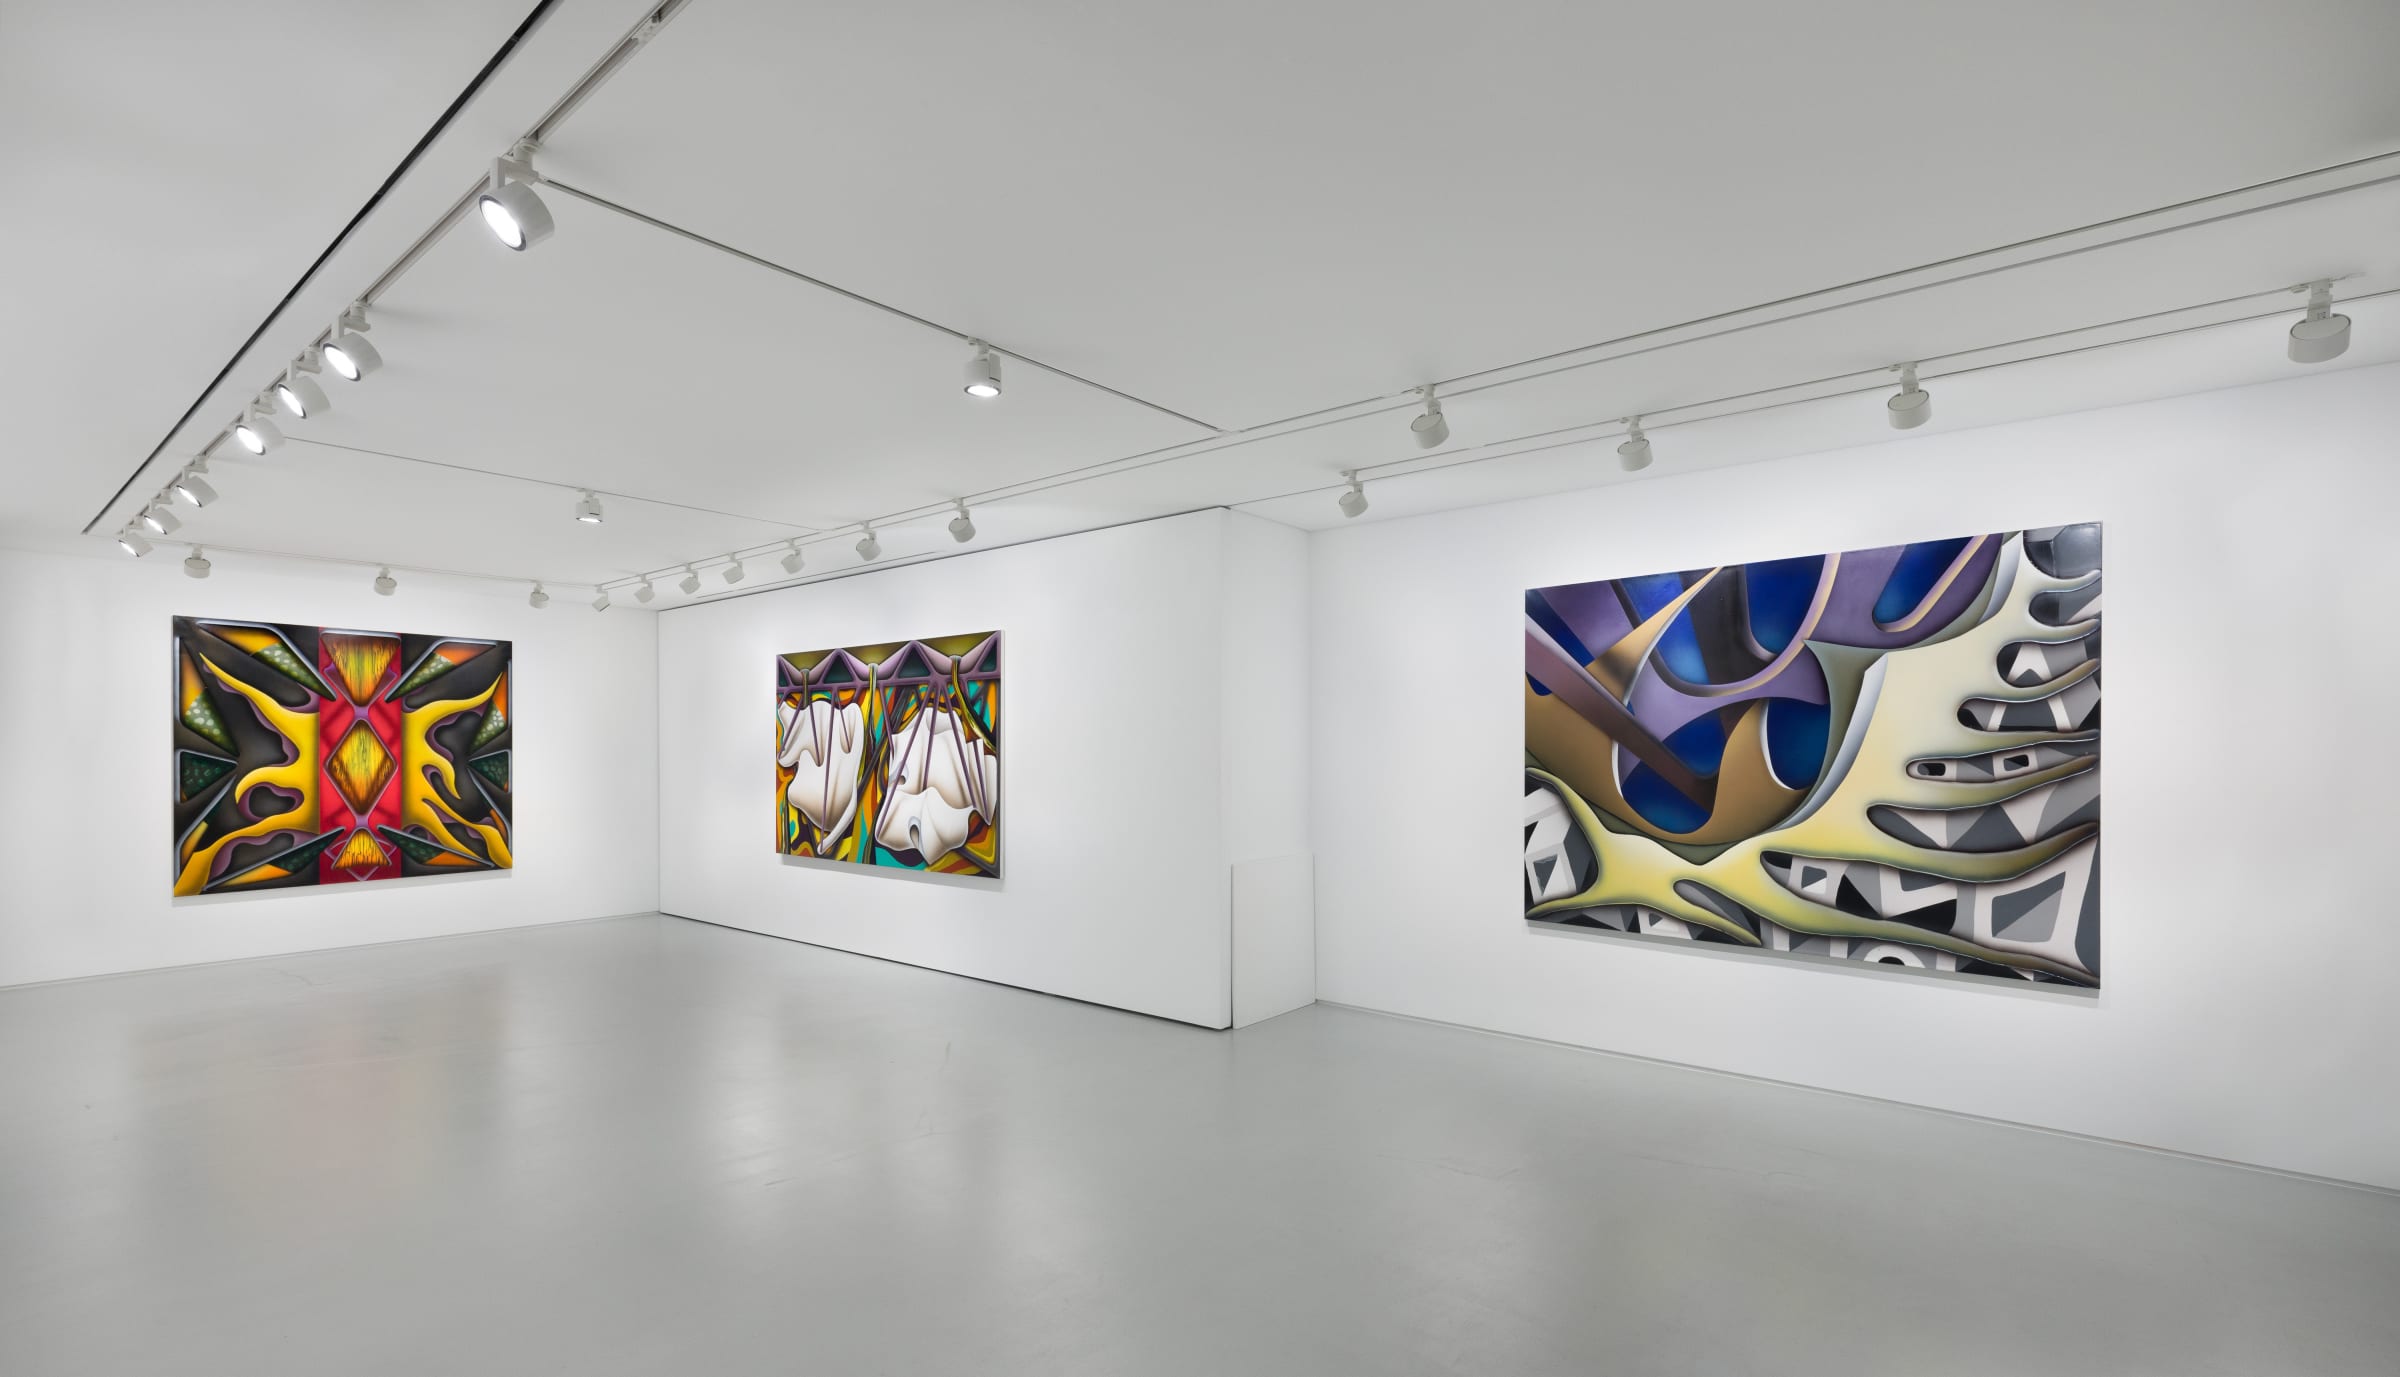 Harm Gerdes Panorama Installation View February 16 – April 6, 2023 Peres Projects, Seoul Photographed by: Siwoo Lee, OnArt studio